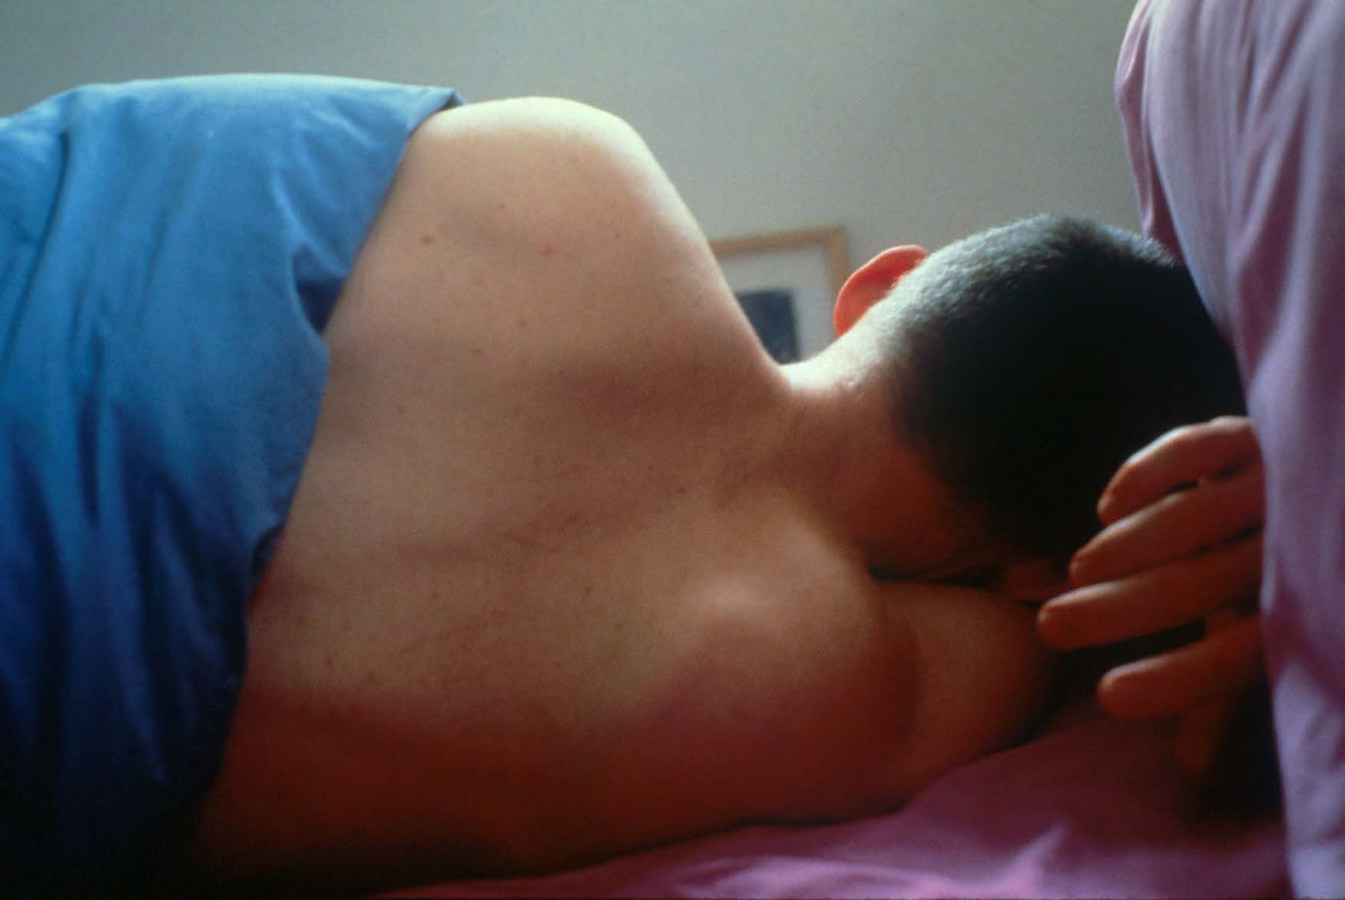 Color photograph of a person in bed with their back to the viewer